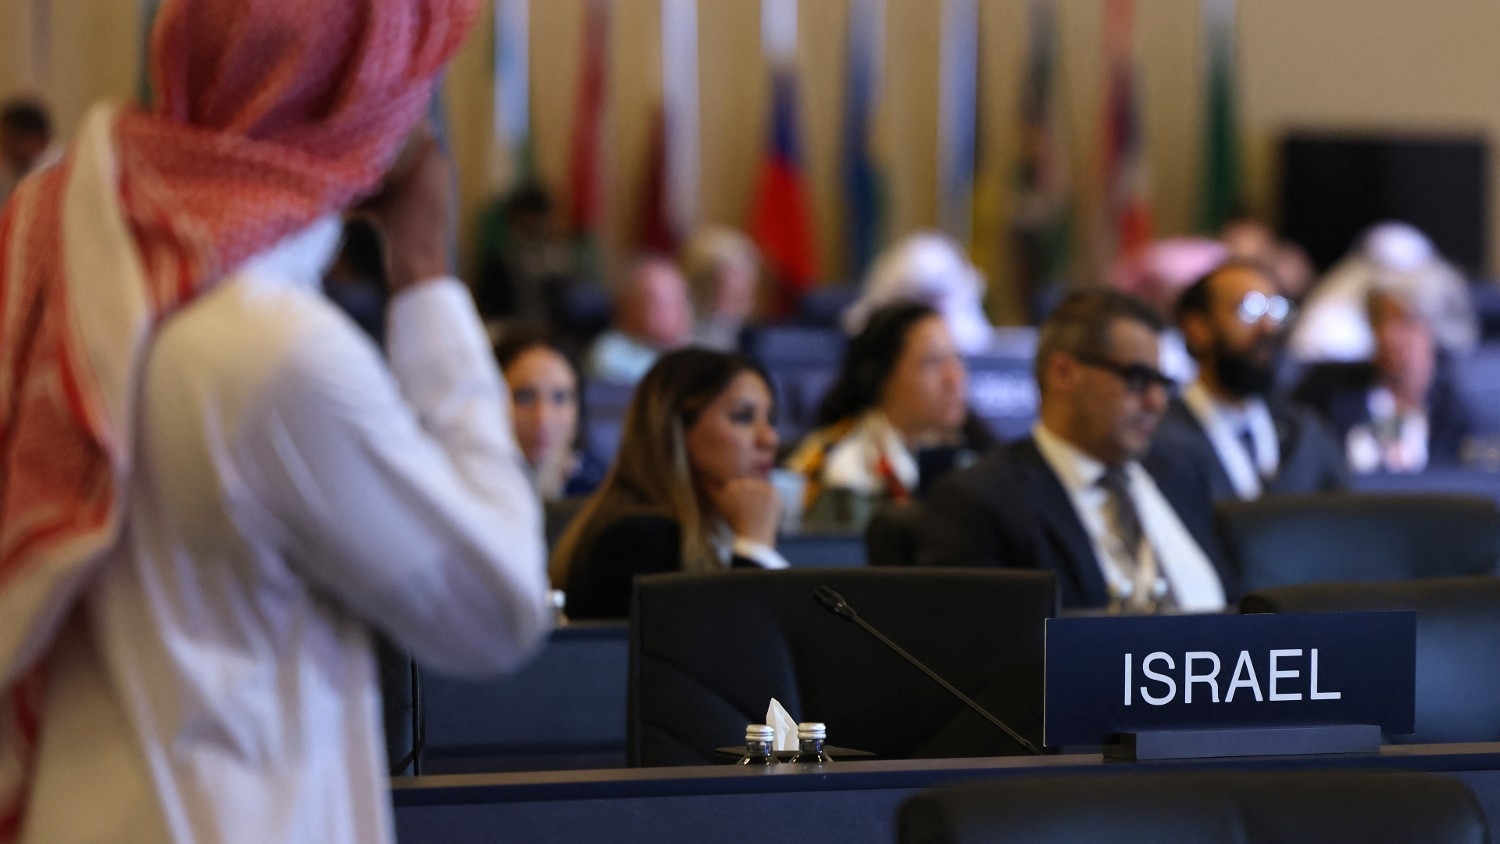 A plaque used to reserve the seat of the delegation from Israel is seen during the UNESCO Extended 45th session of the World Heritage Committee in Riyadh on 11 September 2023.